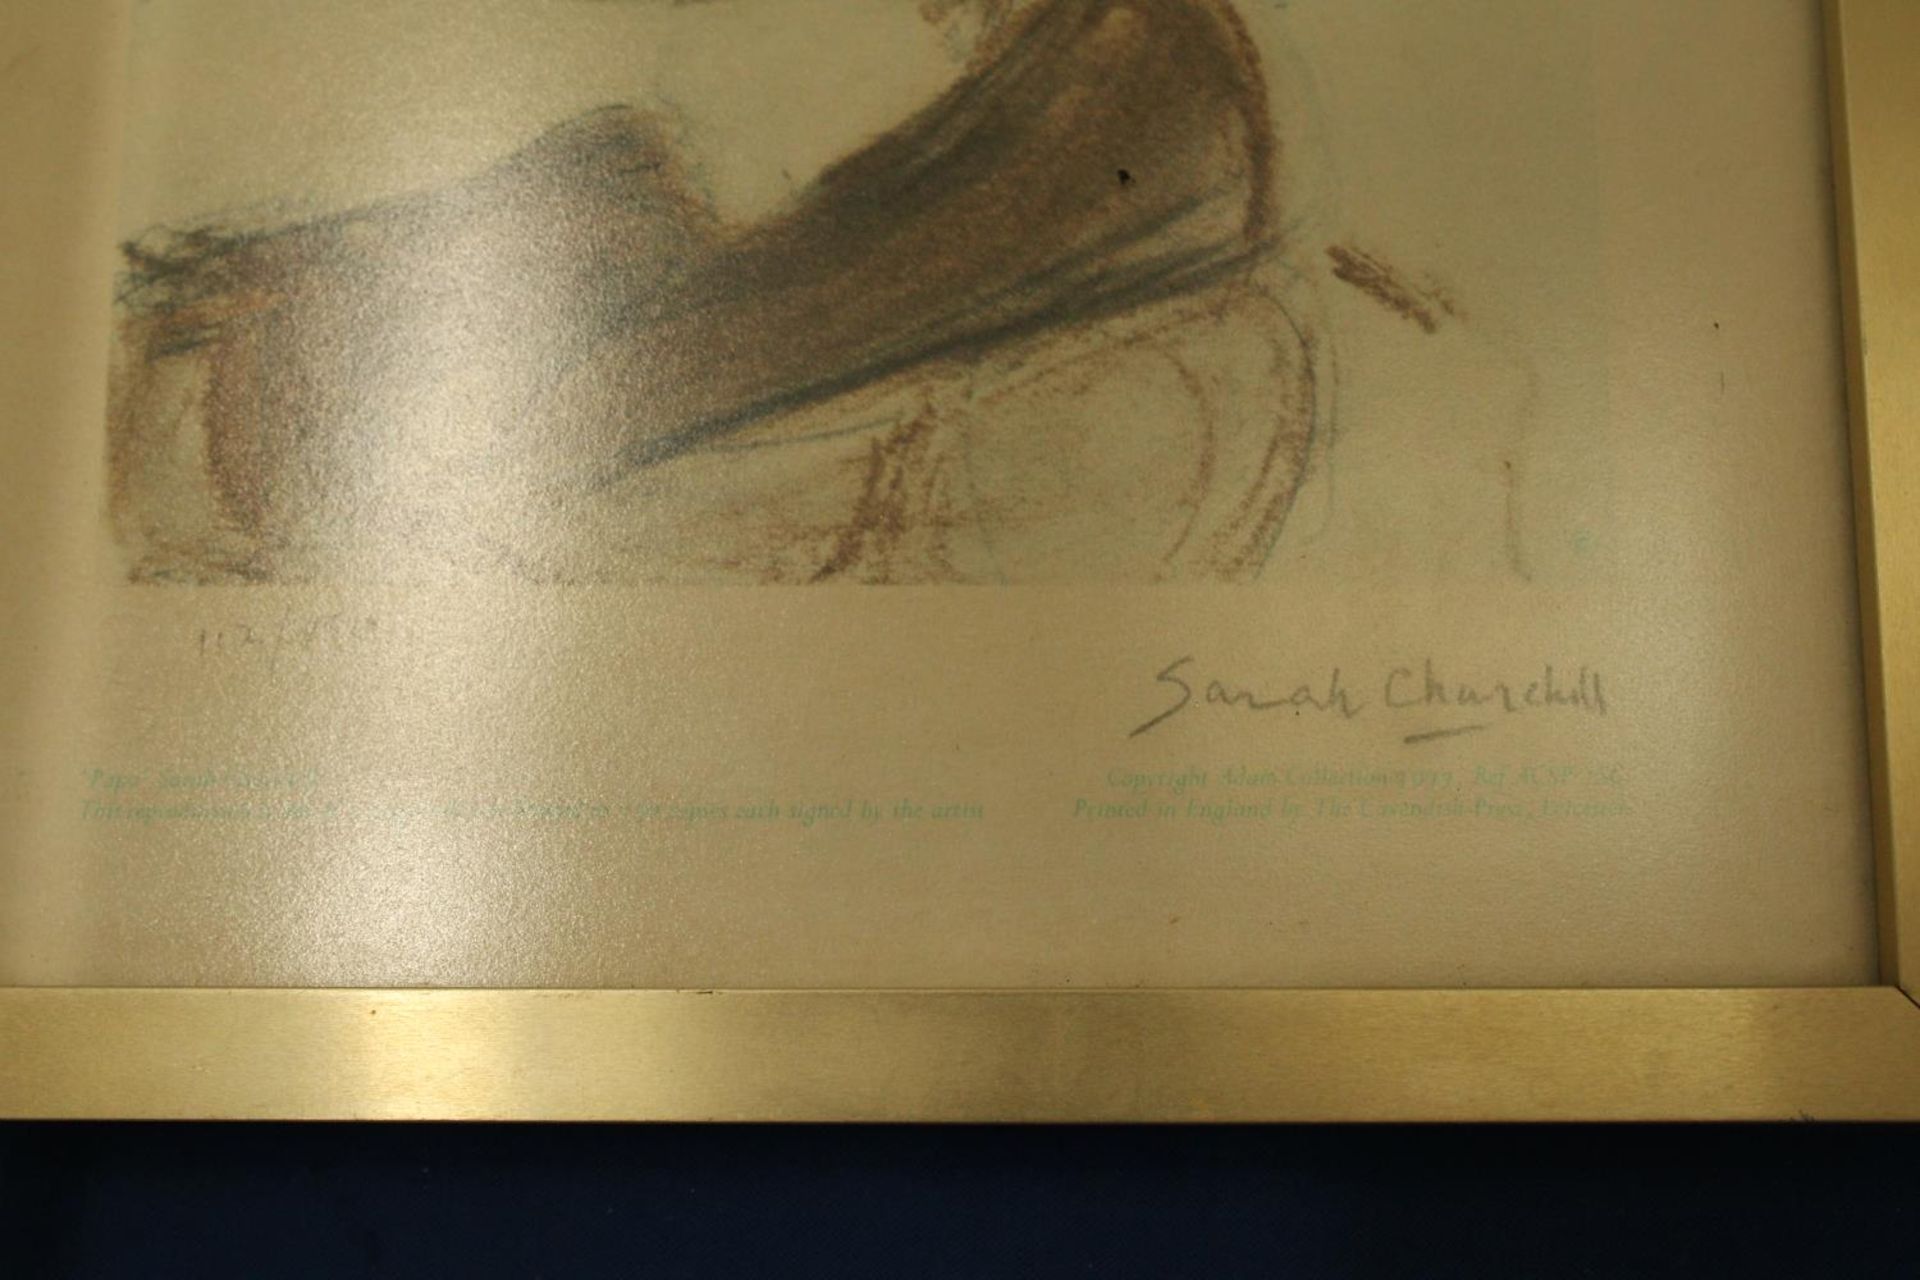 A SIGNED LIMITED EDITION PRINT BY SARAH CHURCHILL 112/750 - Image 3 of 4